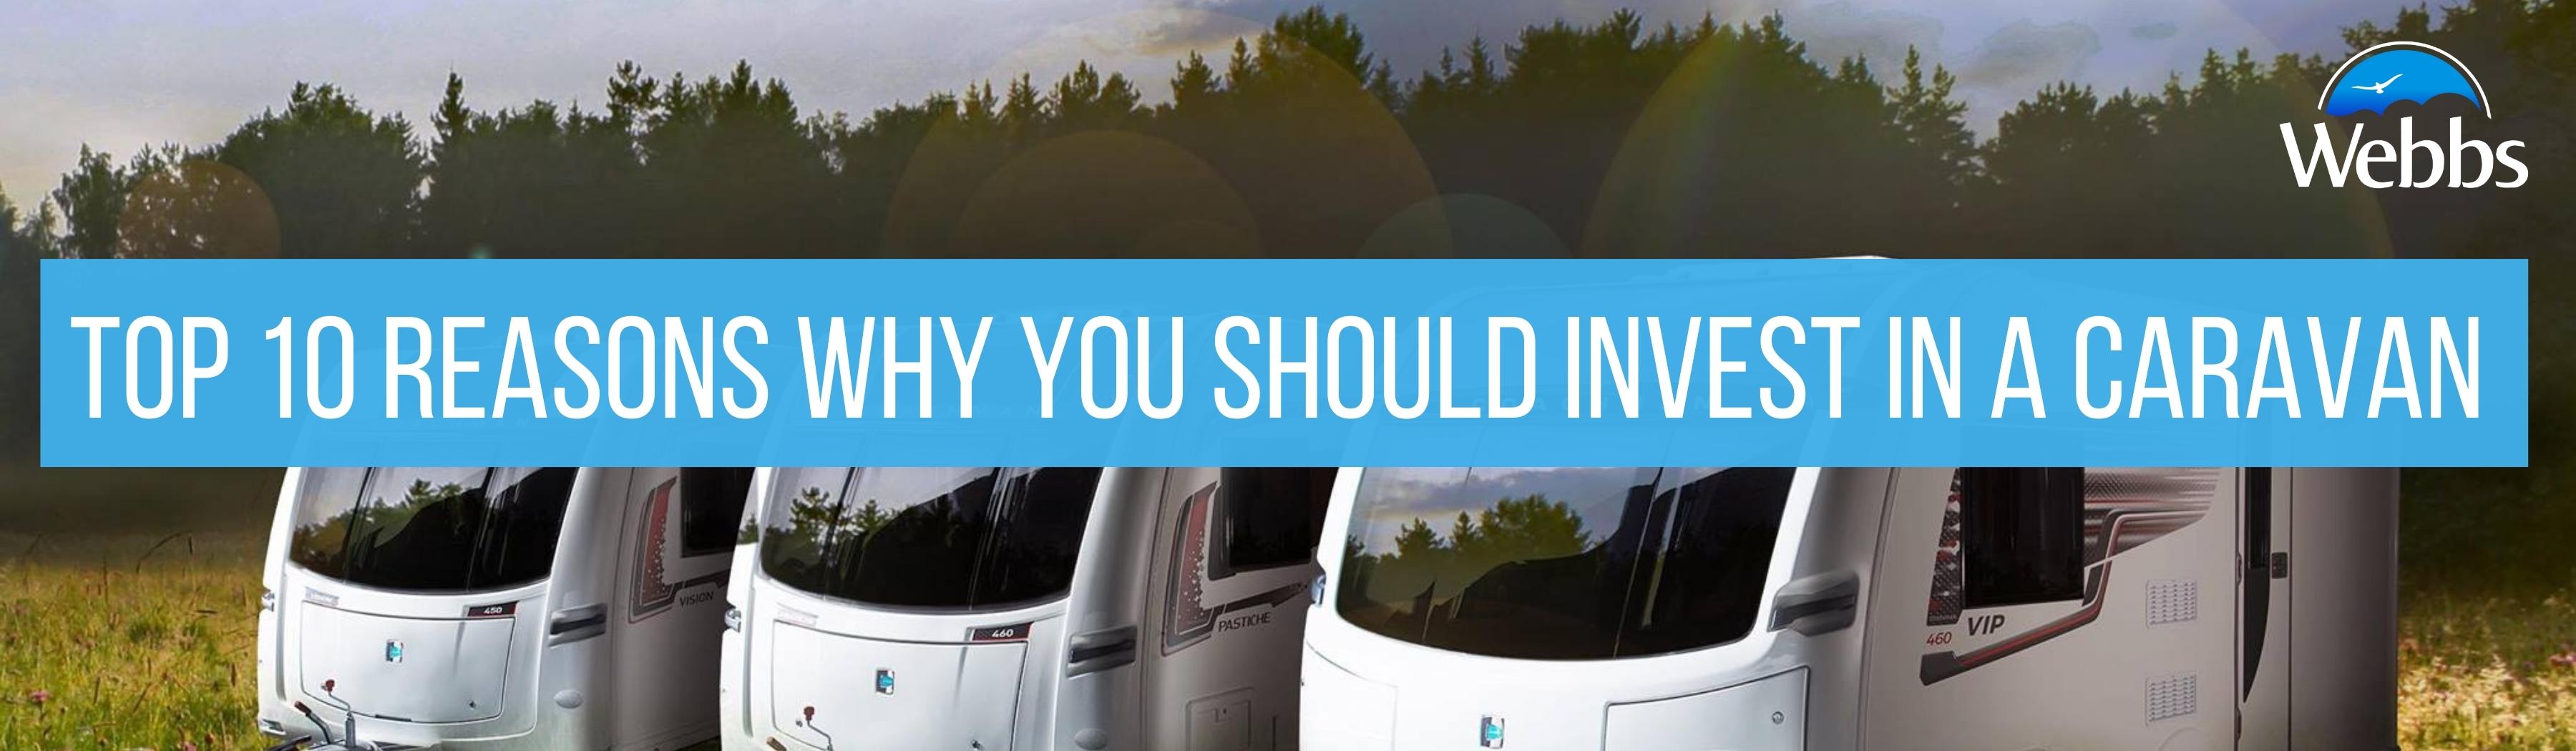 A line of caravans in a field. 10 Reasons Why You Should Invest In A Caravan by Webbs.